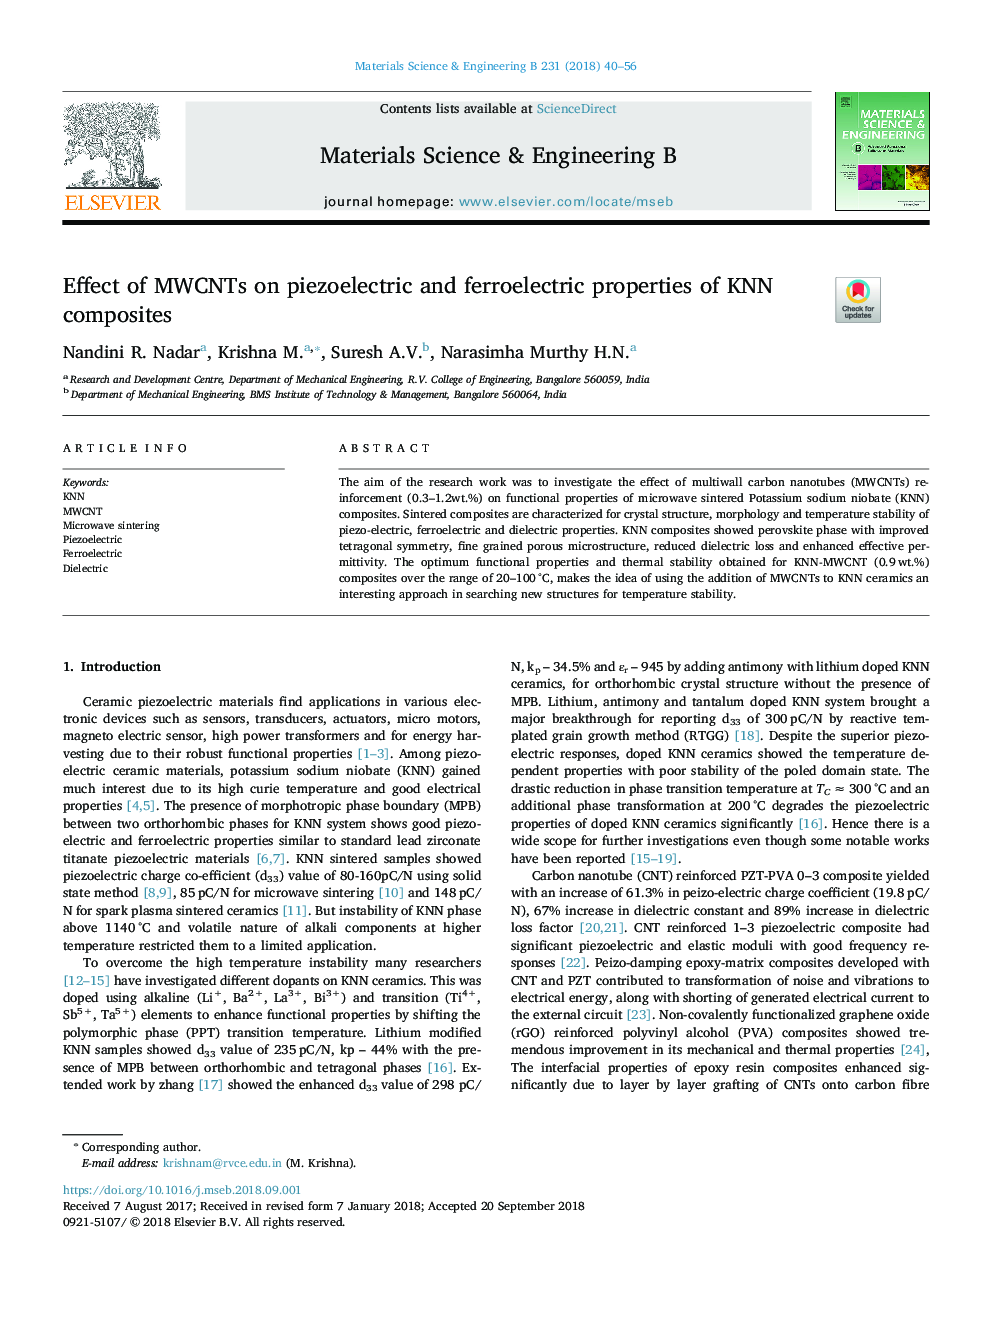 Effect of MWCNTs on piezoelectric and ferroelectric properties of KNN composites